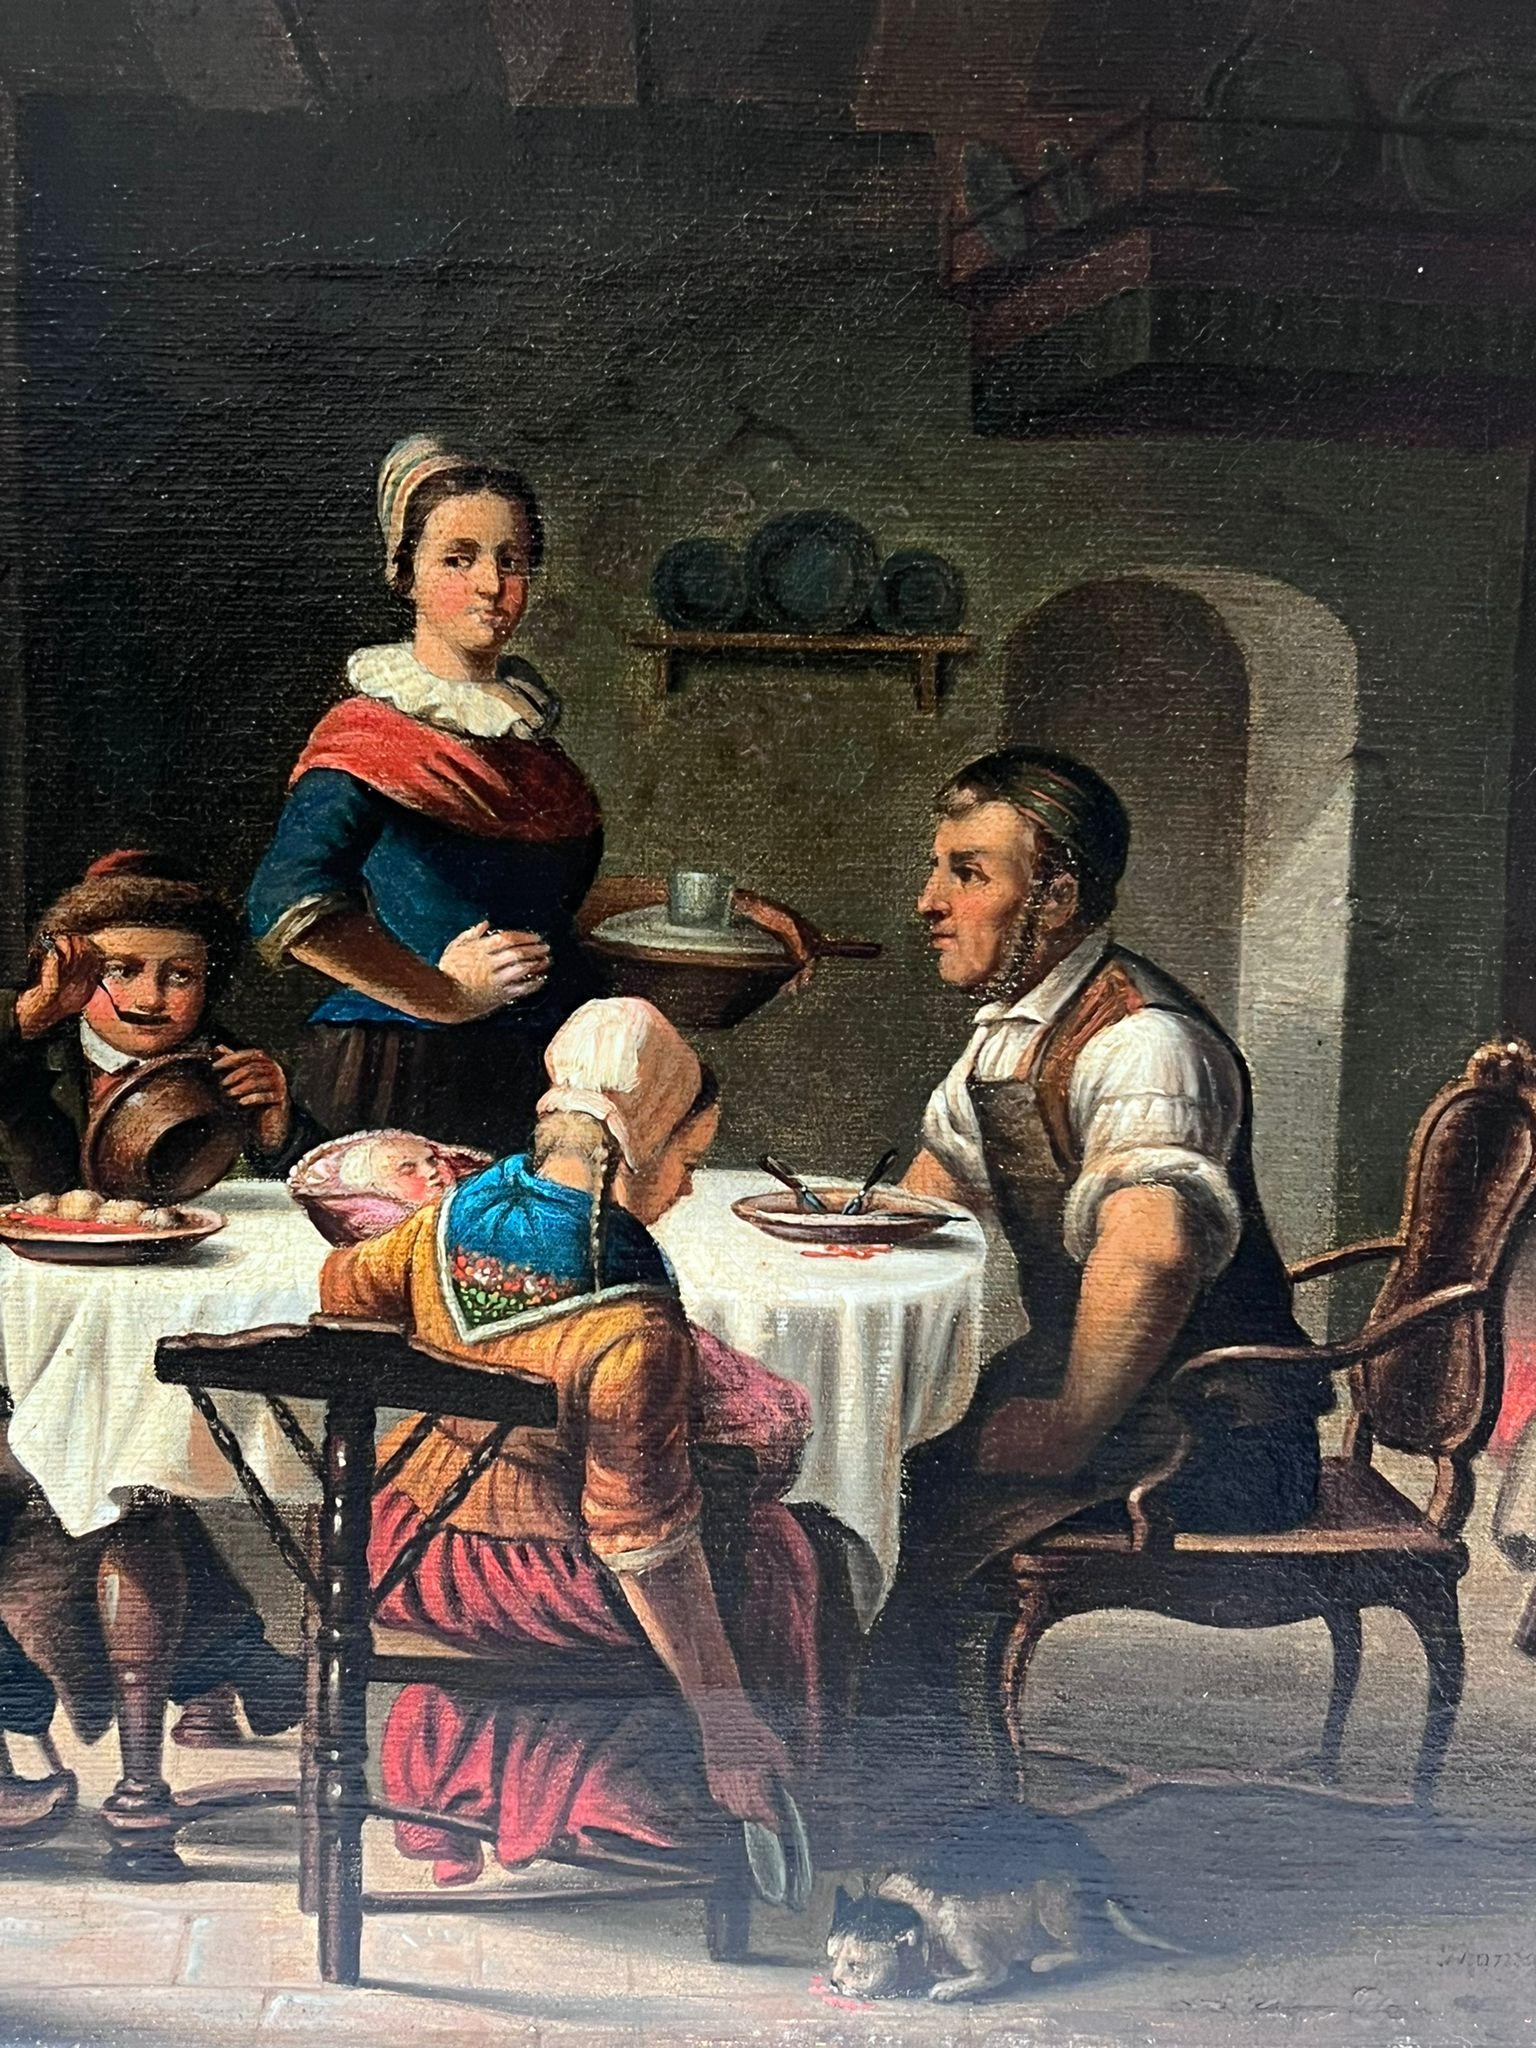 The Family Meal
German School, mid 19th century
oil on canvas, unframed
canvas : 10.75 x 11.75 inches
provenance: private collection
condition: very good and sound condition 